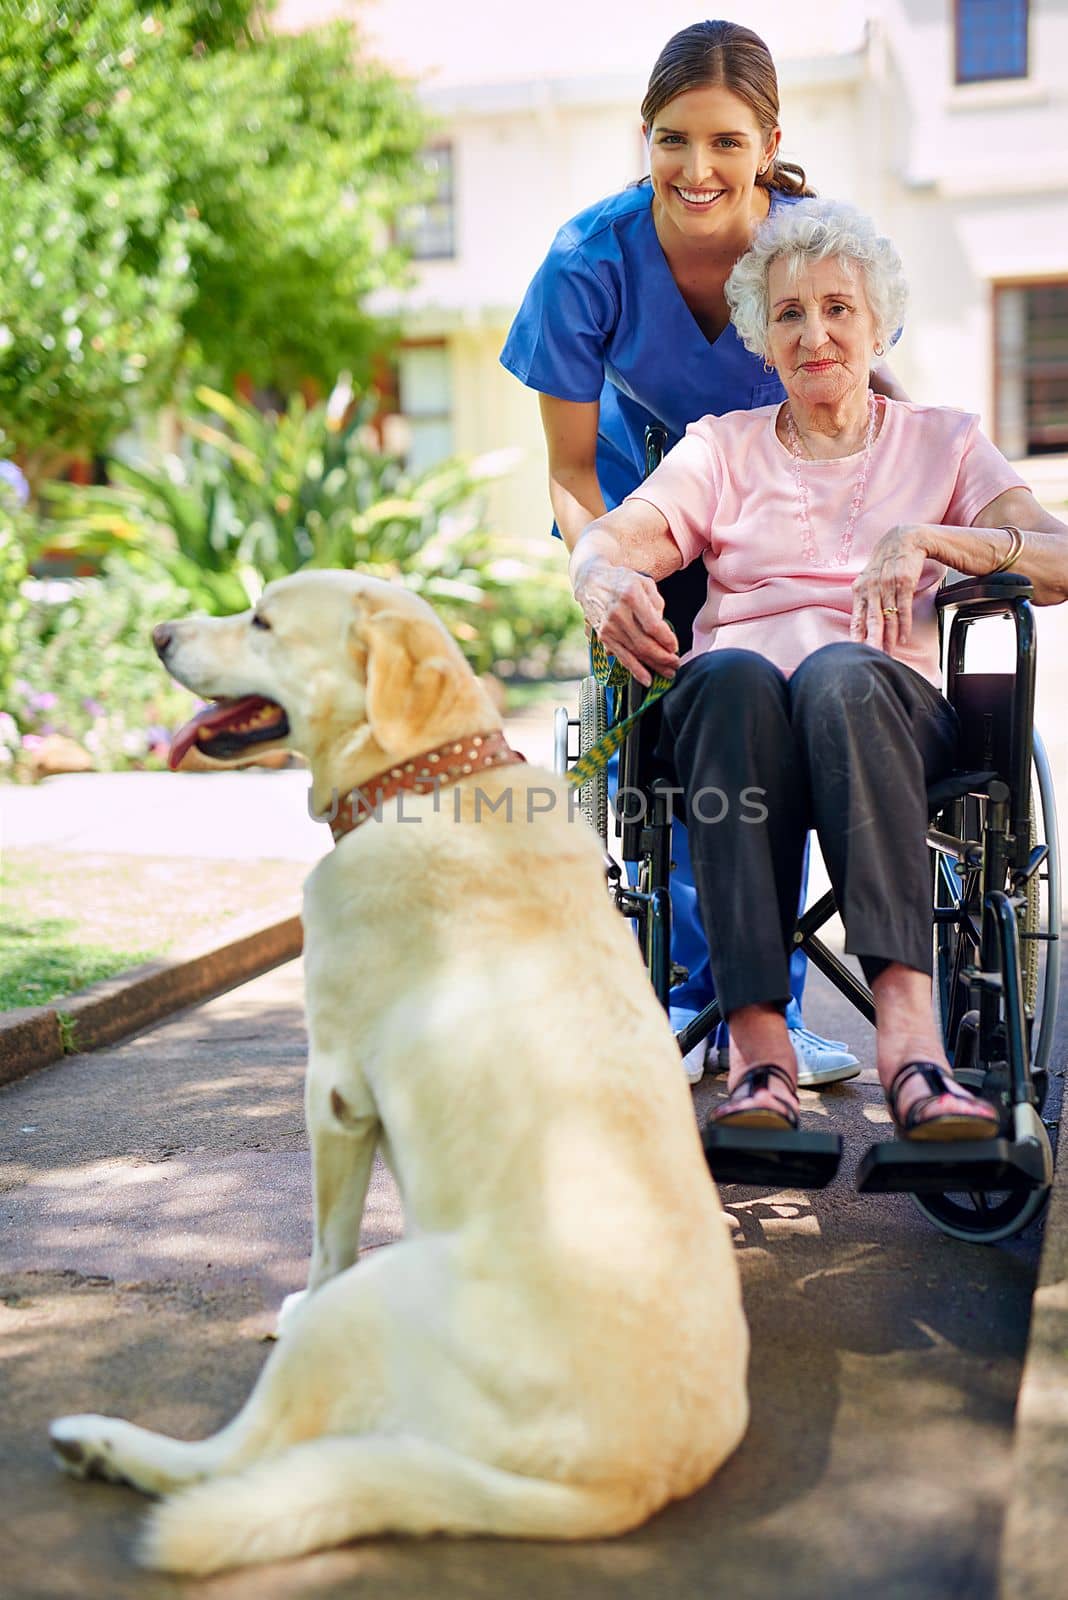 Hes her most trusted friend. a resident, her dog and a nurse outside in the retirement home garden